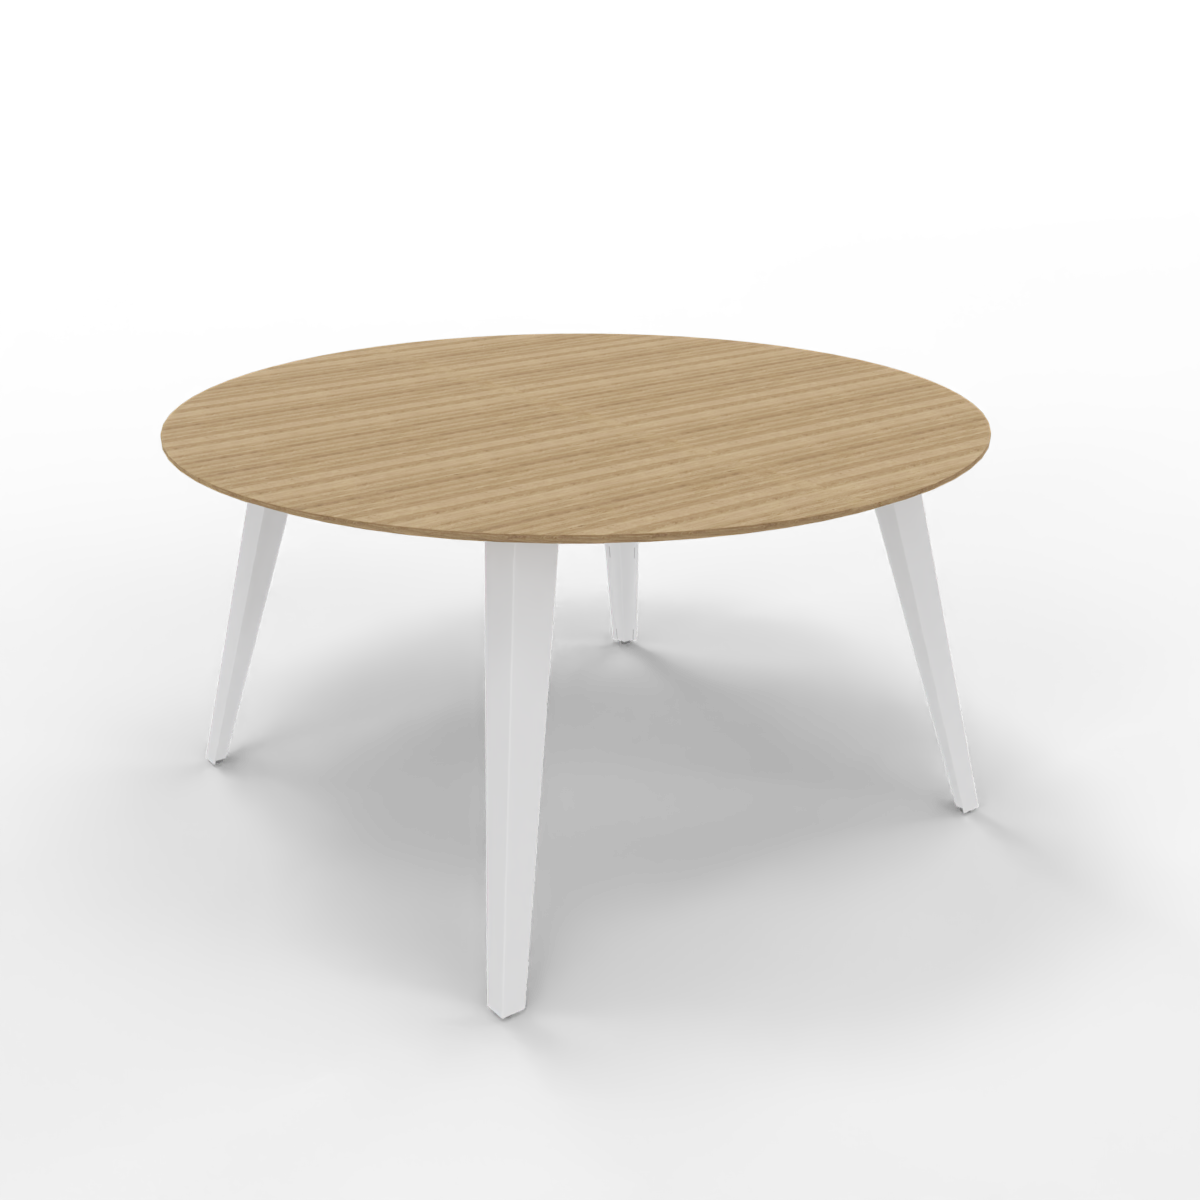 Spider conference table round